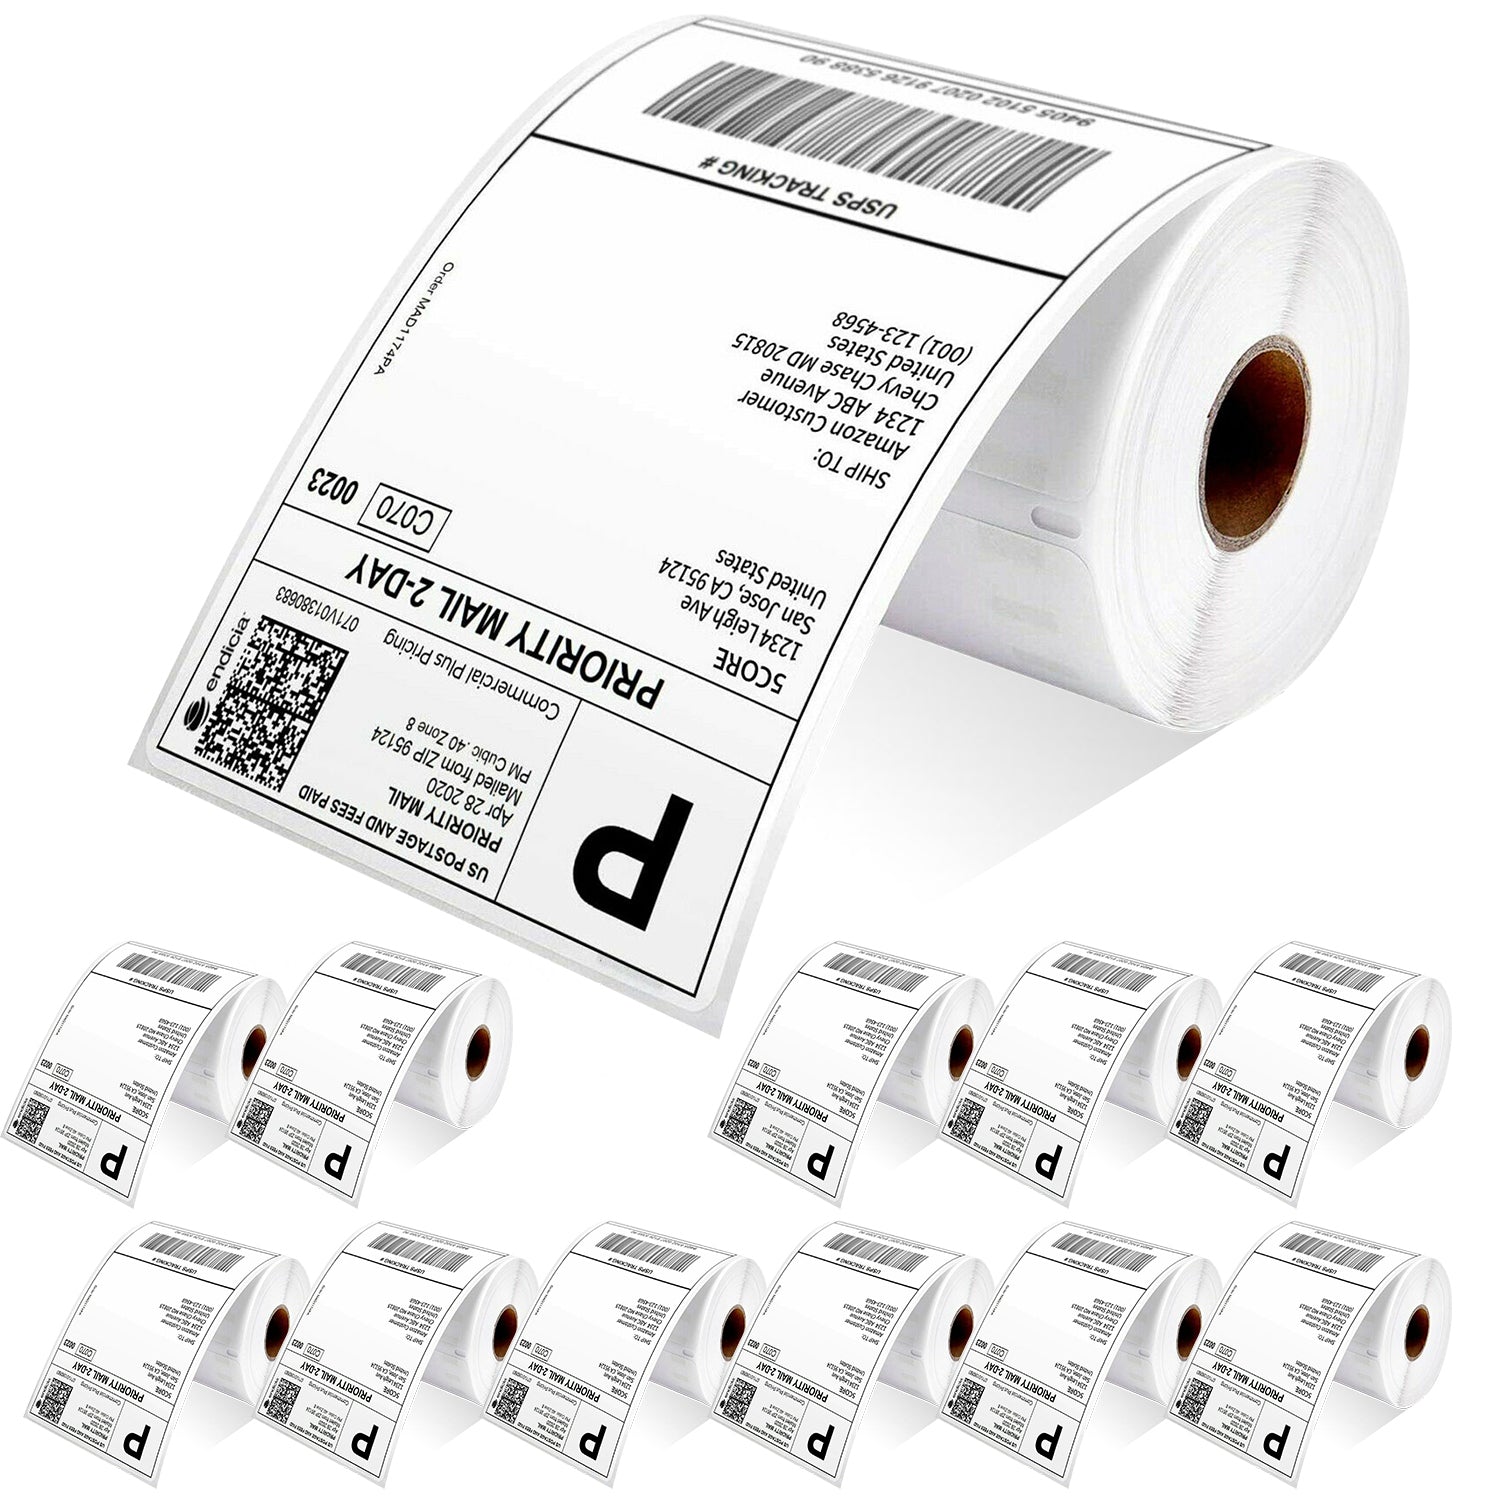 5 Core 4x6" Thermal Shipping Label Commercial Grade 4 Rolls Direct Labels 250/paper ZP450 Sticker